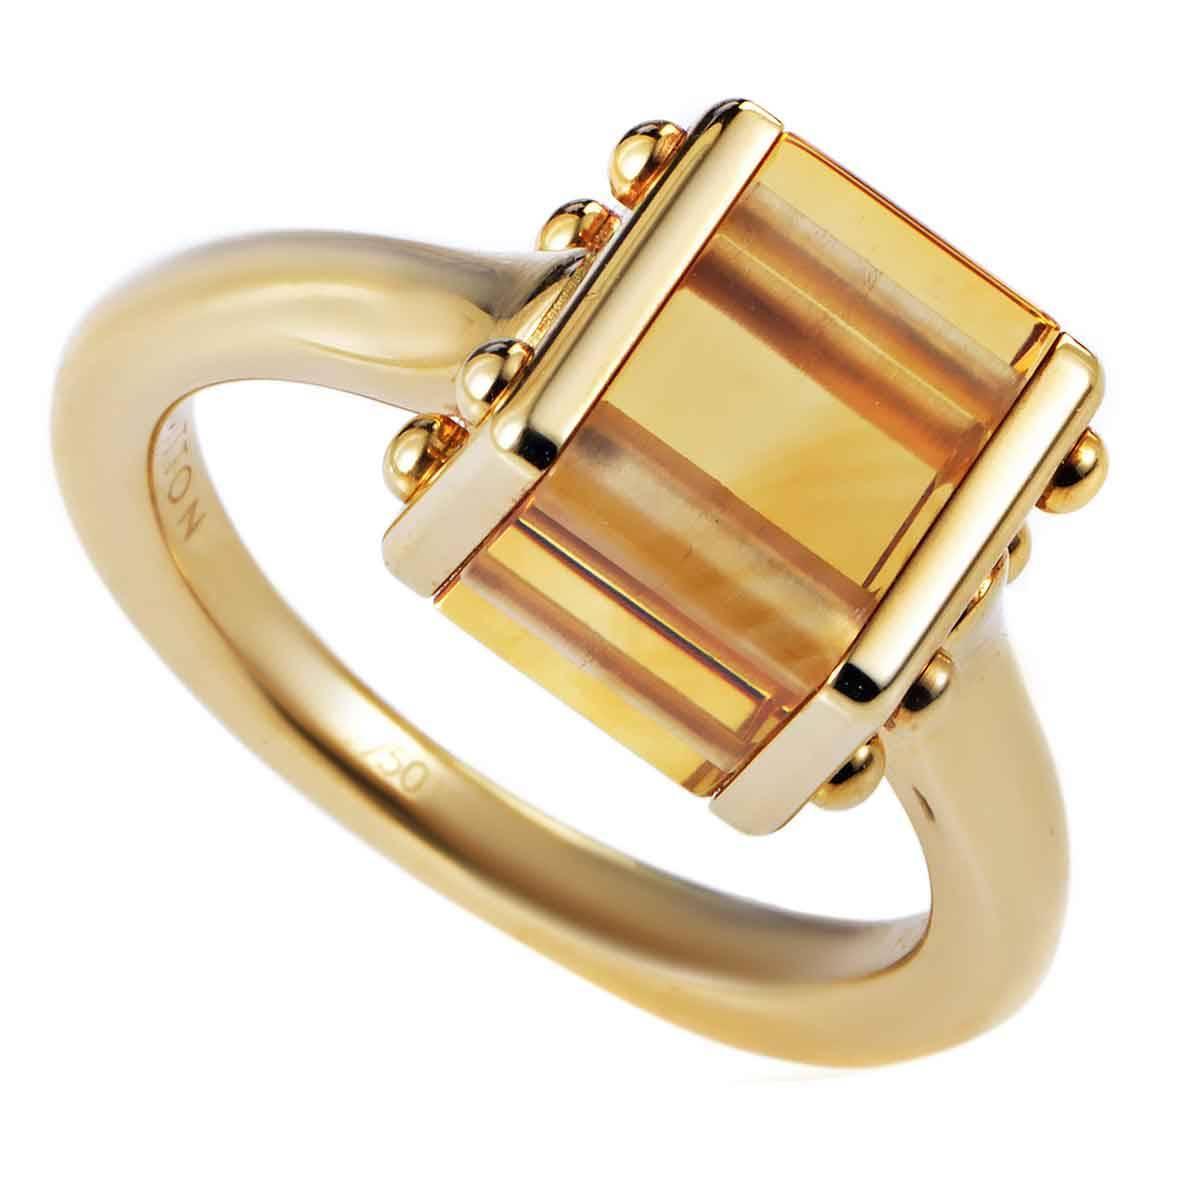 Louis Vuitton Citrine Gold Ring For Sale at 1stdibs